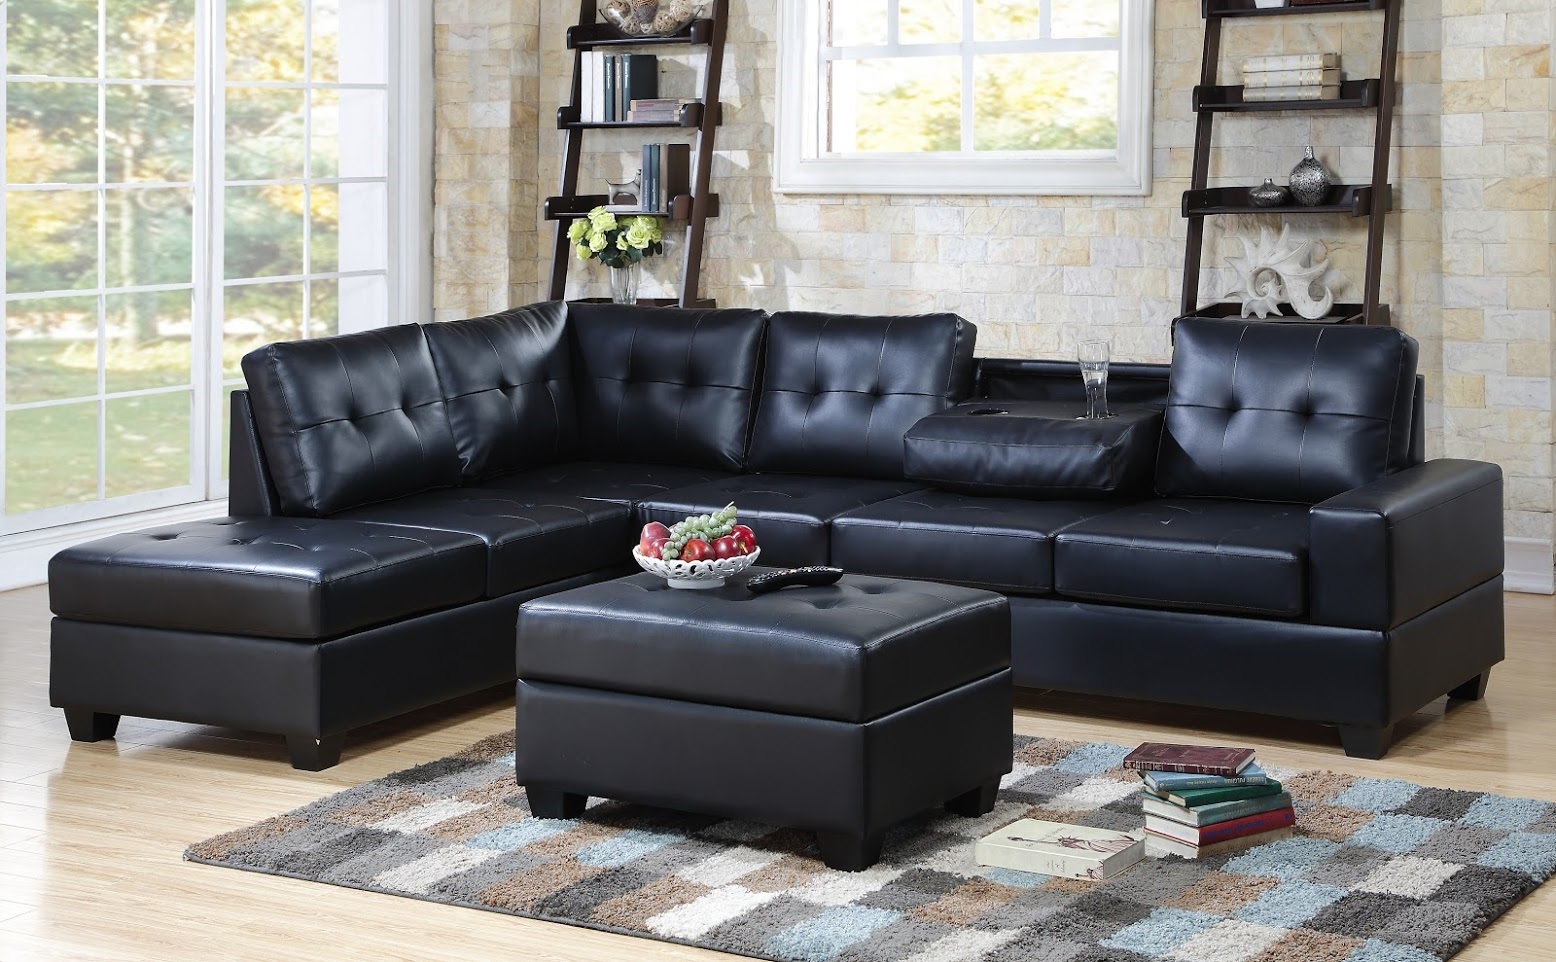 *HEIGHTS BLACK SECTIONAL+OTTOMAN